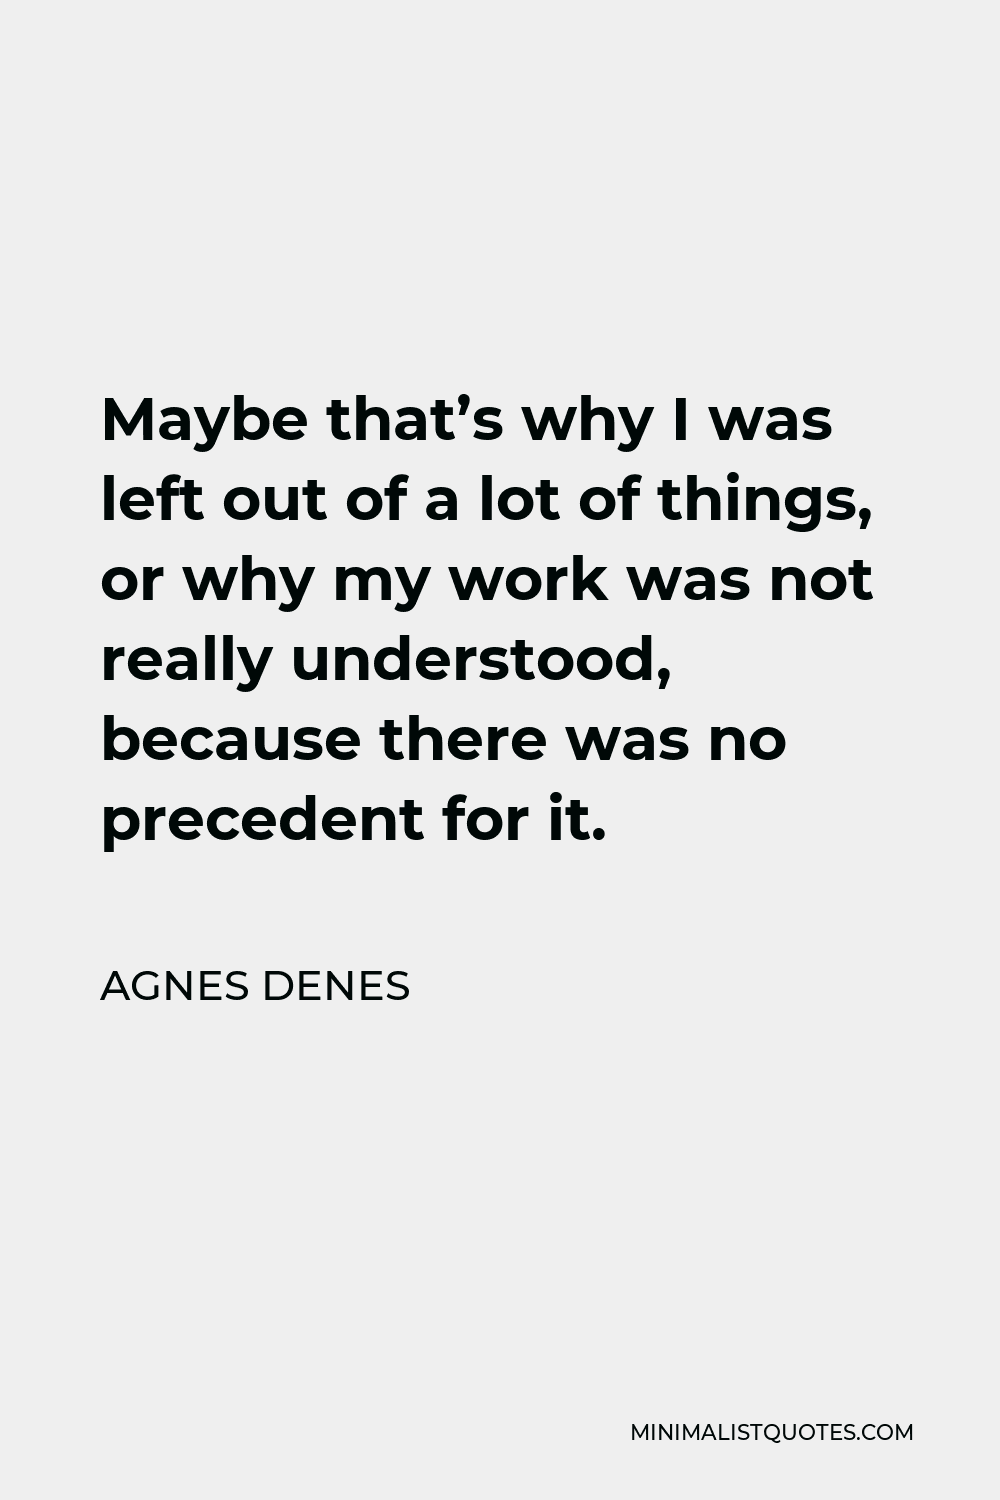 Agnes Denes Quote - Maybe that’s why I was left out of a lot of things, or why my work was not really understood, because there was no precedent for it.